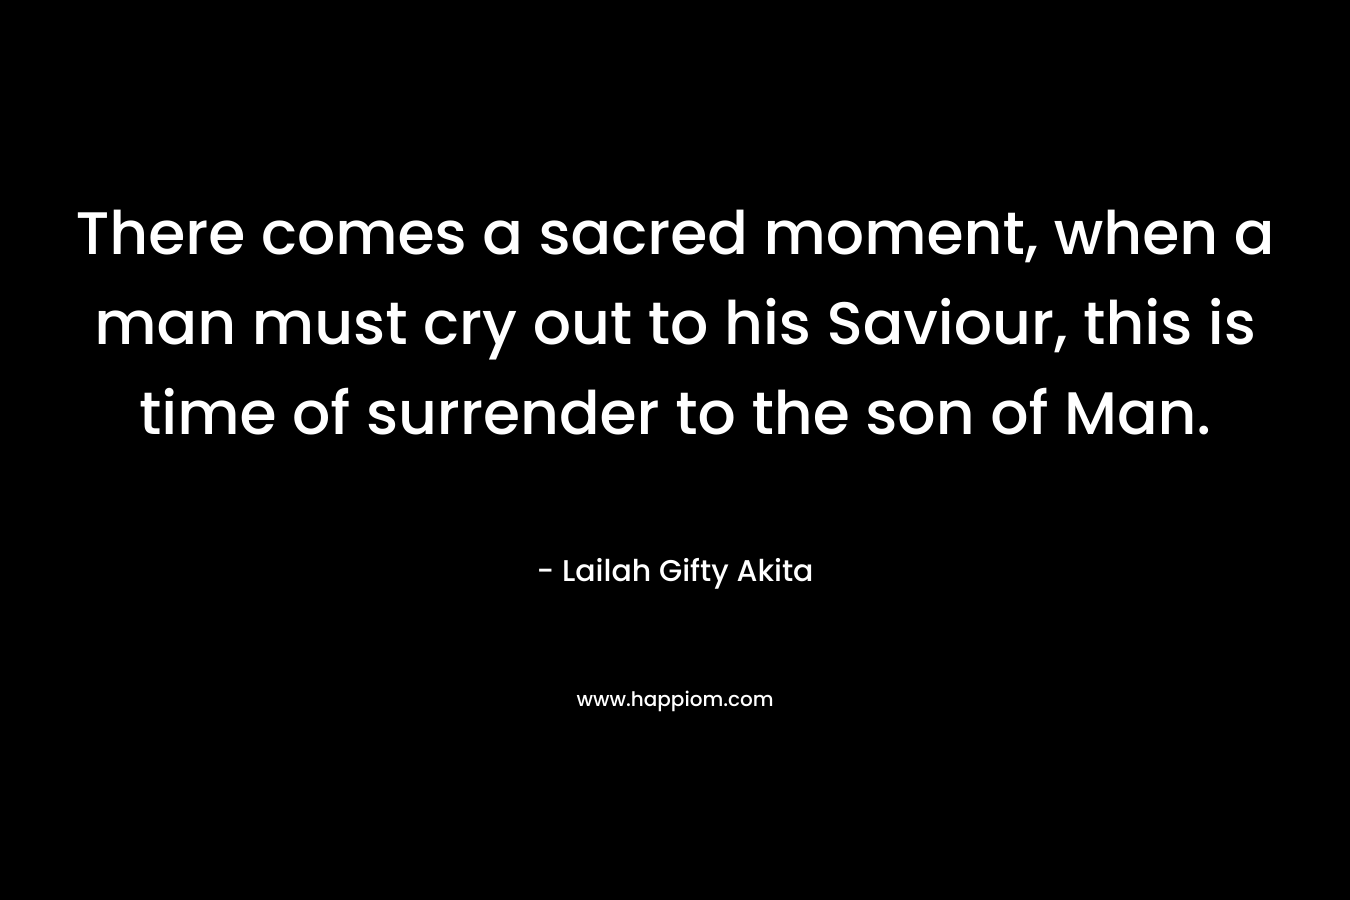 There comes a sacred moment, when a man must cry out to his Saviour, this is time of surrender to the son of Man.